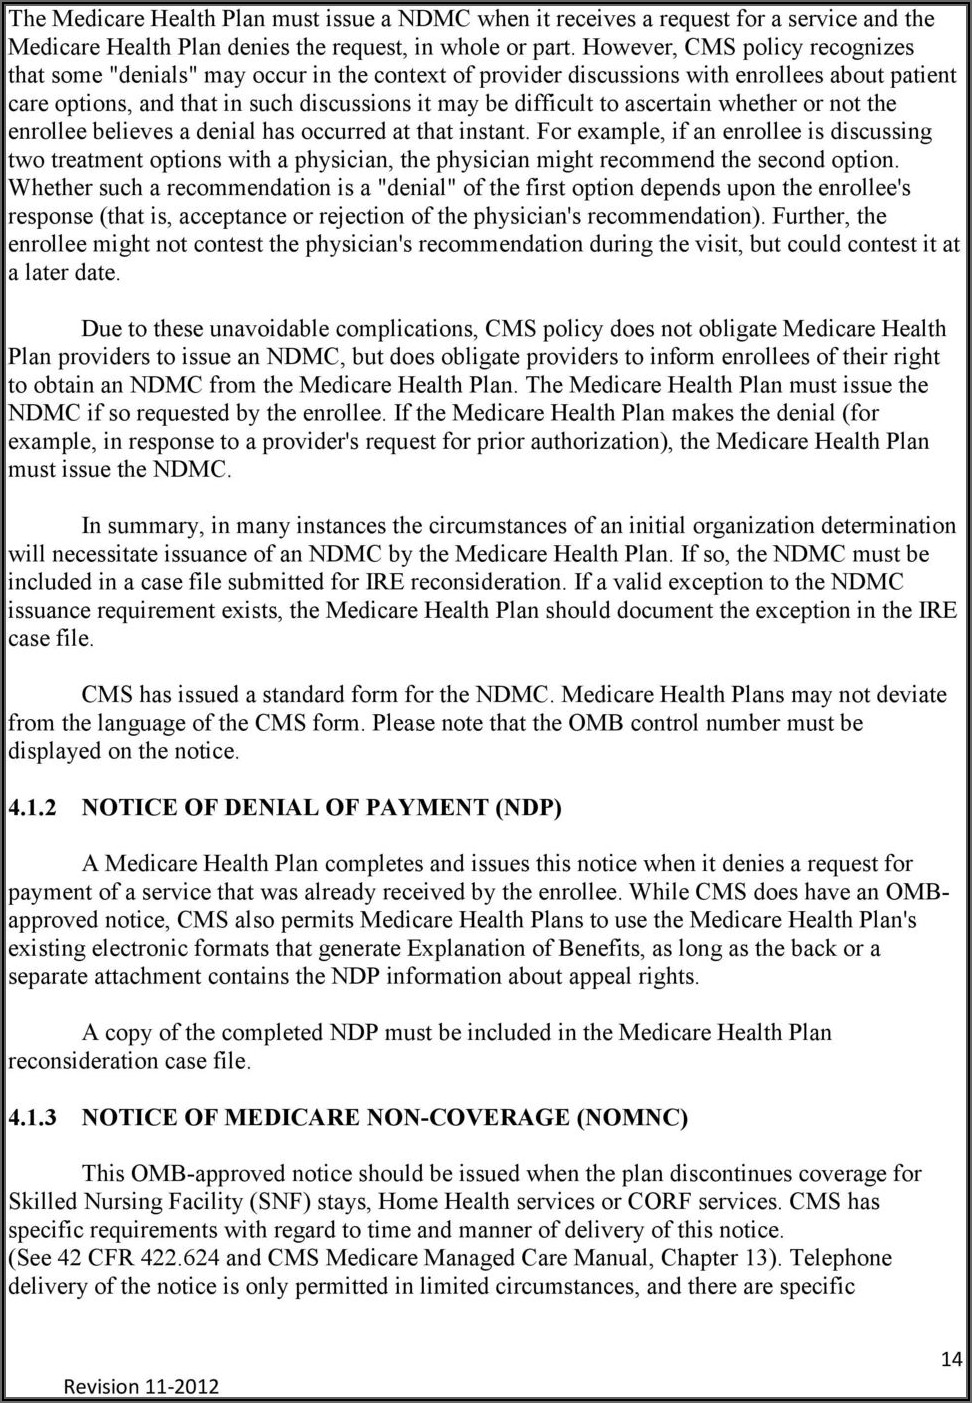 Notice Of Medicare Non Coverage Form For Home Health